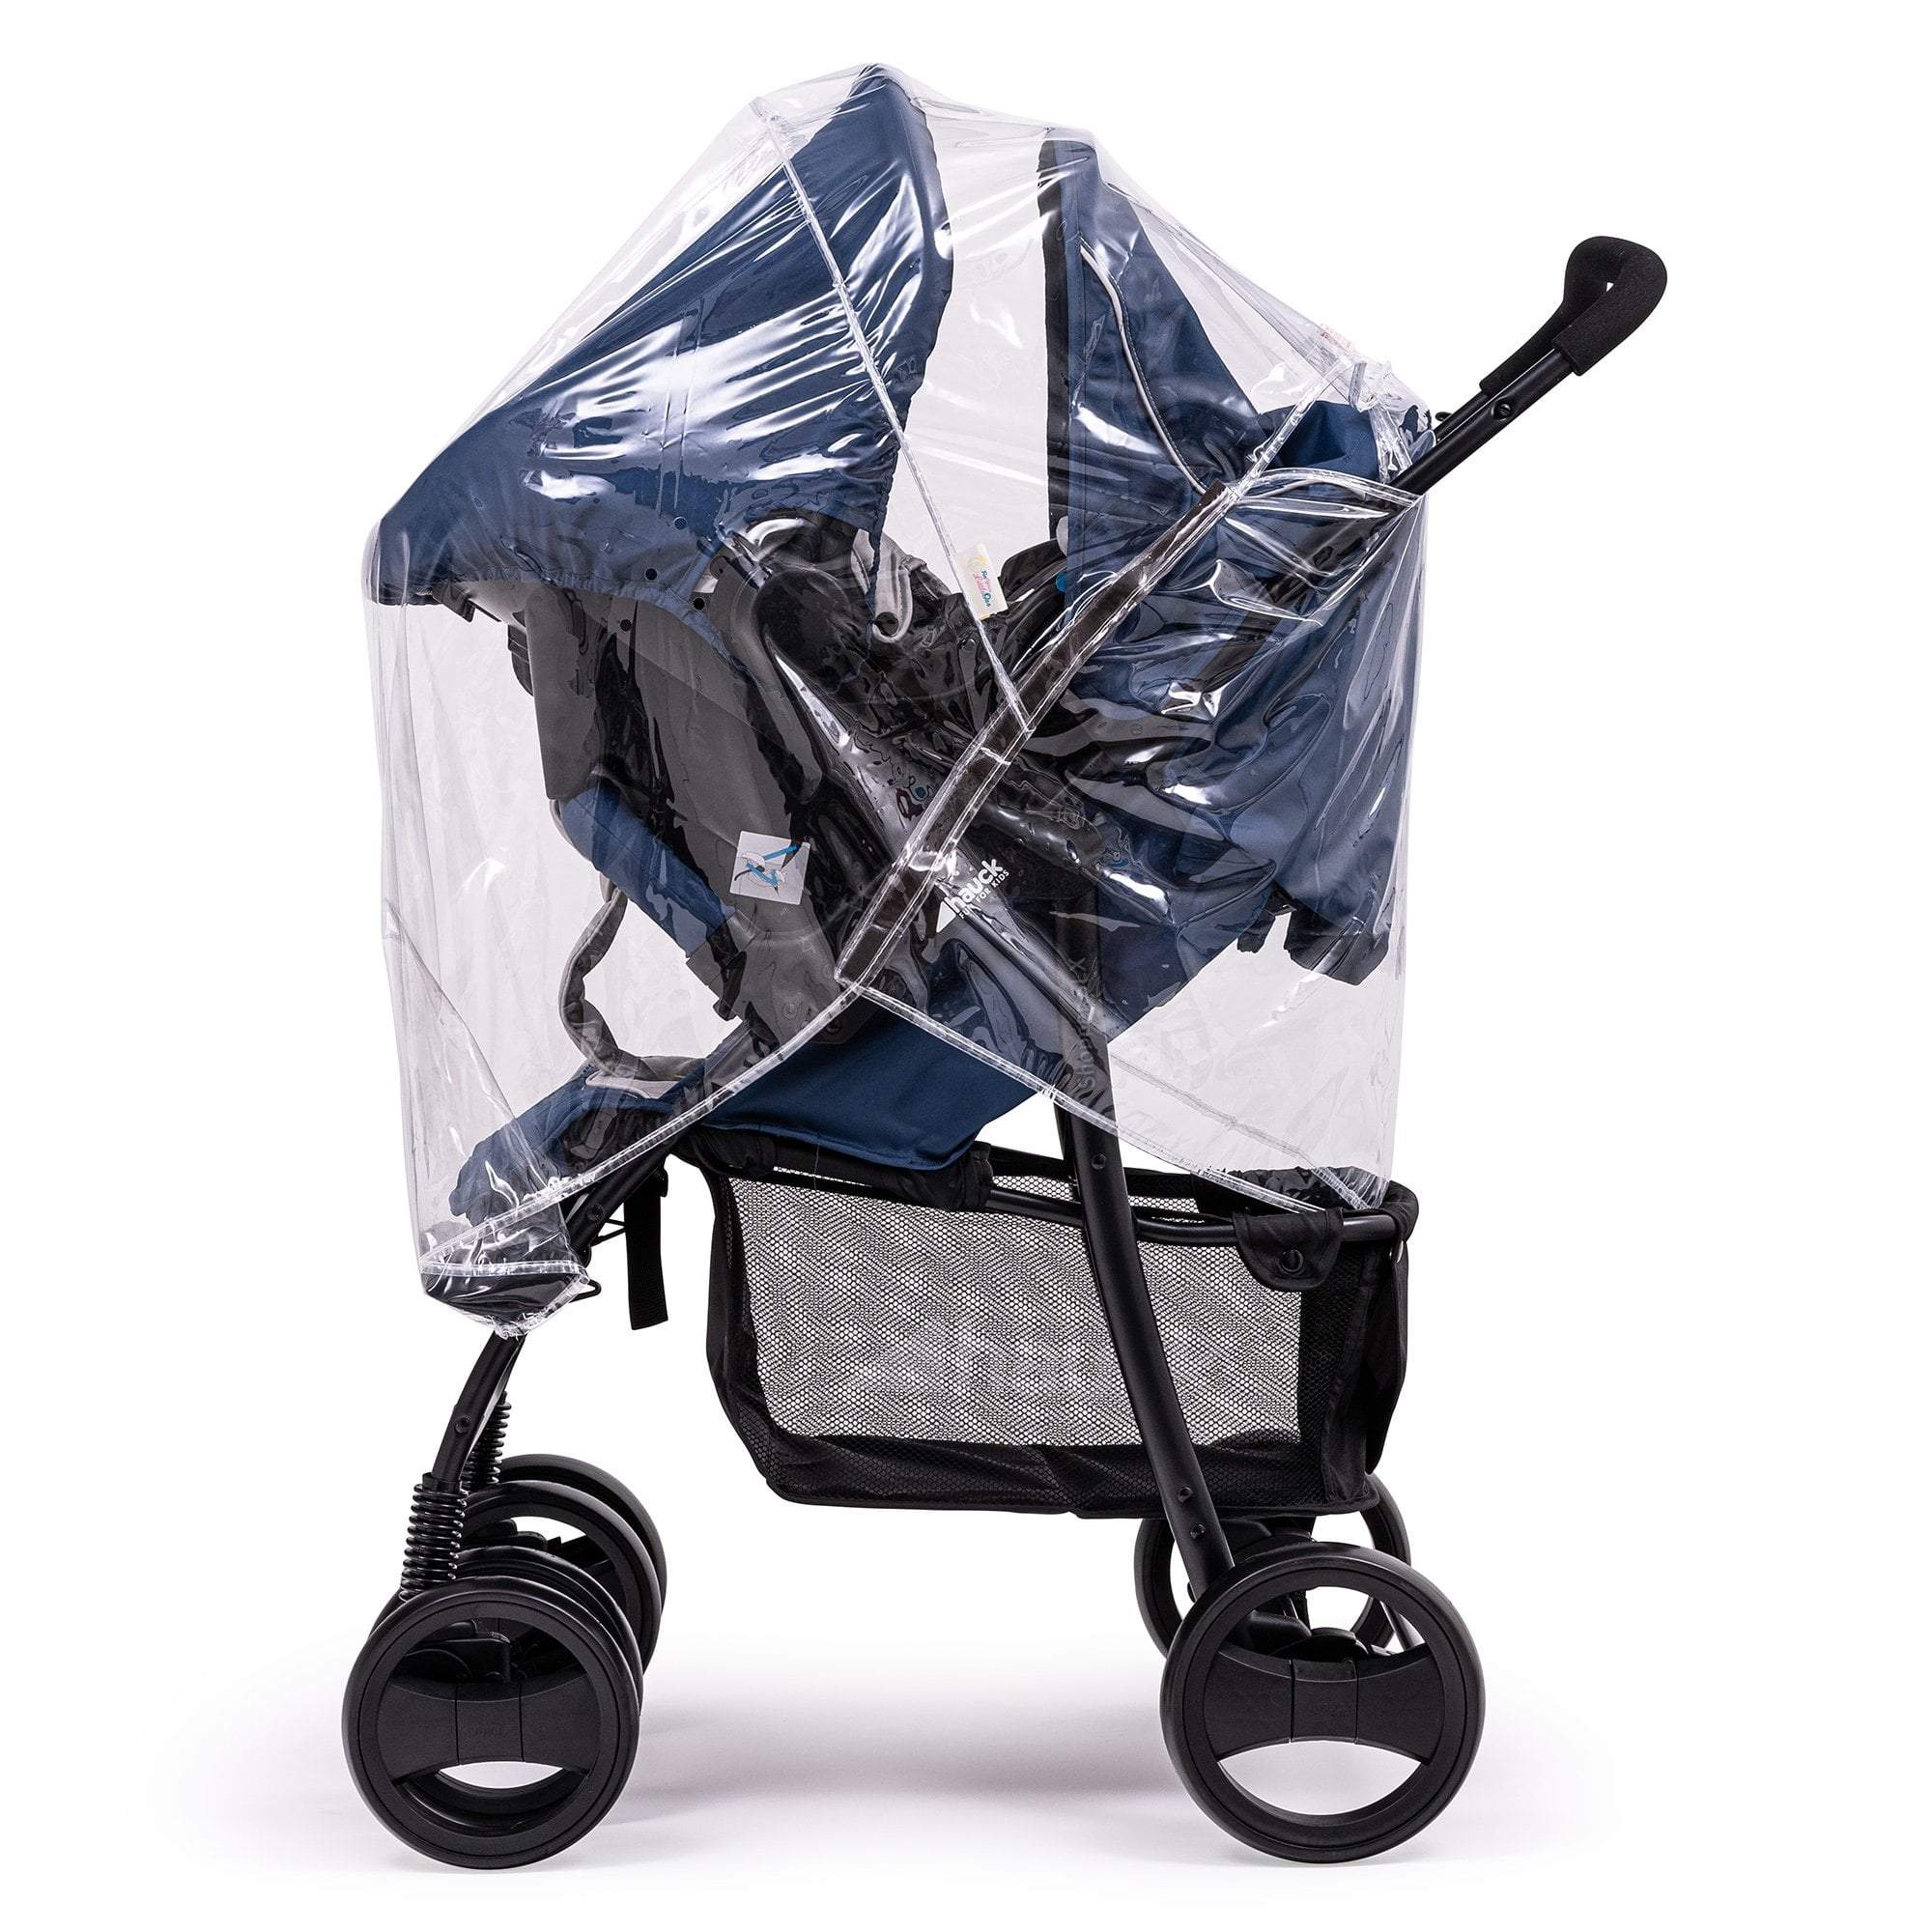 Travel System Raincover Compatible with My Child - Fits All Models - For Your Little One